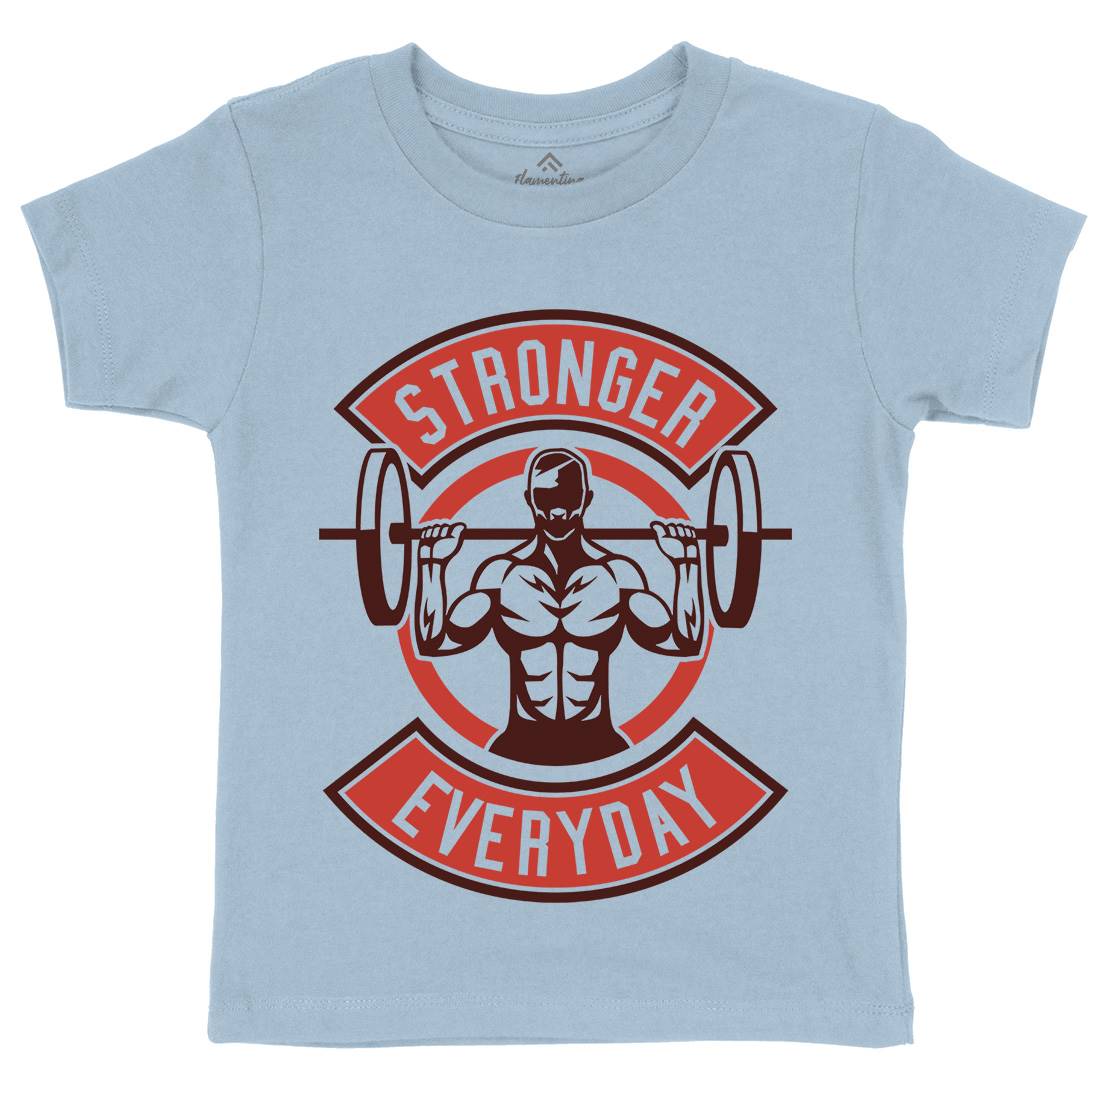 Stronger Everyday Kids Crew Neck T-Shirt Gym A289